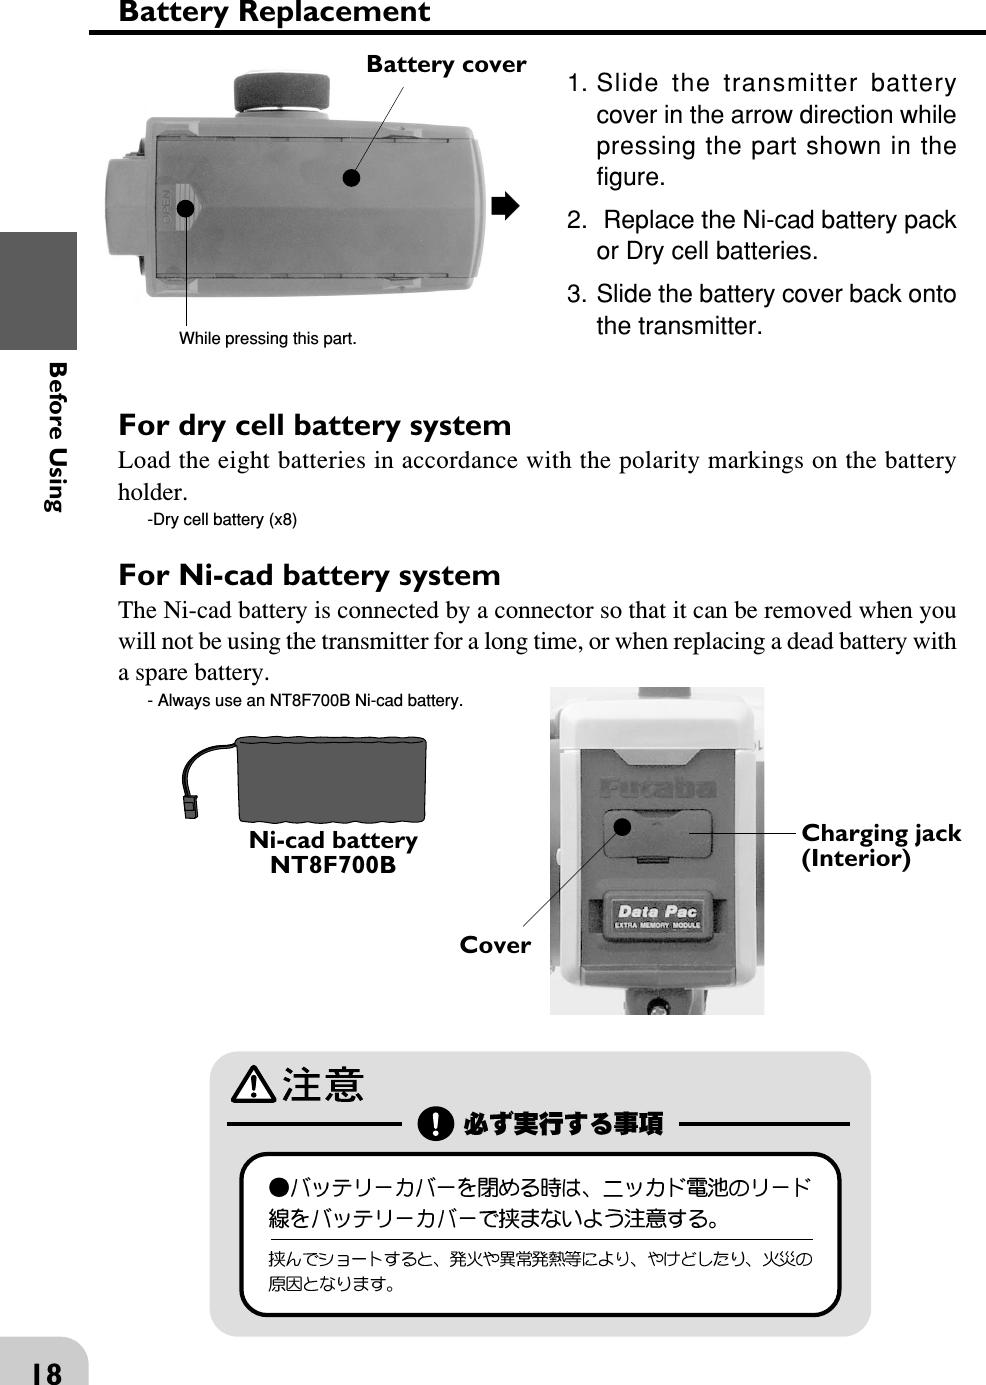 18Before UsingFor Ni-cad battery systemThe Ni-cad battery is connected by a connector so that it can be removed when youwill not be using the transmitter for a long time, or when replacing a dead battery witha spare battery.- Always use an NT8F700B Ni-cad battery.For dry cell battery systemLoad the eight batteries in accordance with the polarity markings on the batteryholder.-Dry cell battery (x8)Battery ReplacementBattery coverWhile pressing this part.1. Slide the transmitter batterycover in the arrow direction whilepressing the part shown in thefigure.2.  Replace the Ni-cad battery packor Dry cell batteries.3. Slide the battery cover back ontothe transmitter.Charging jack(Interior)CoverNi-cad batteryNT8F700B